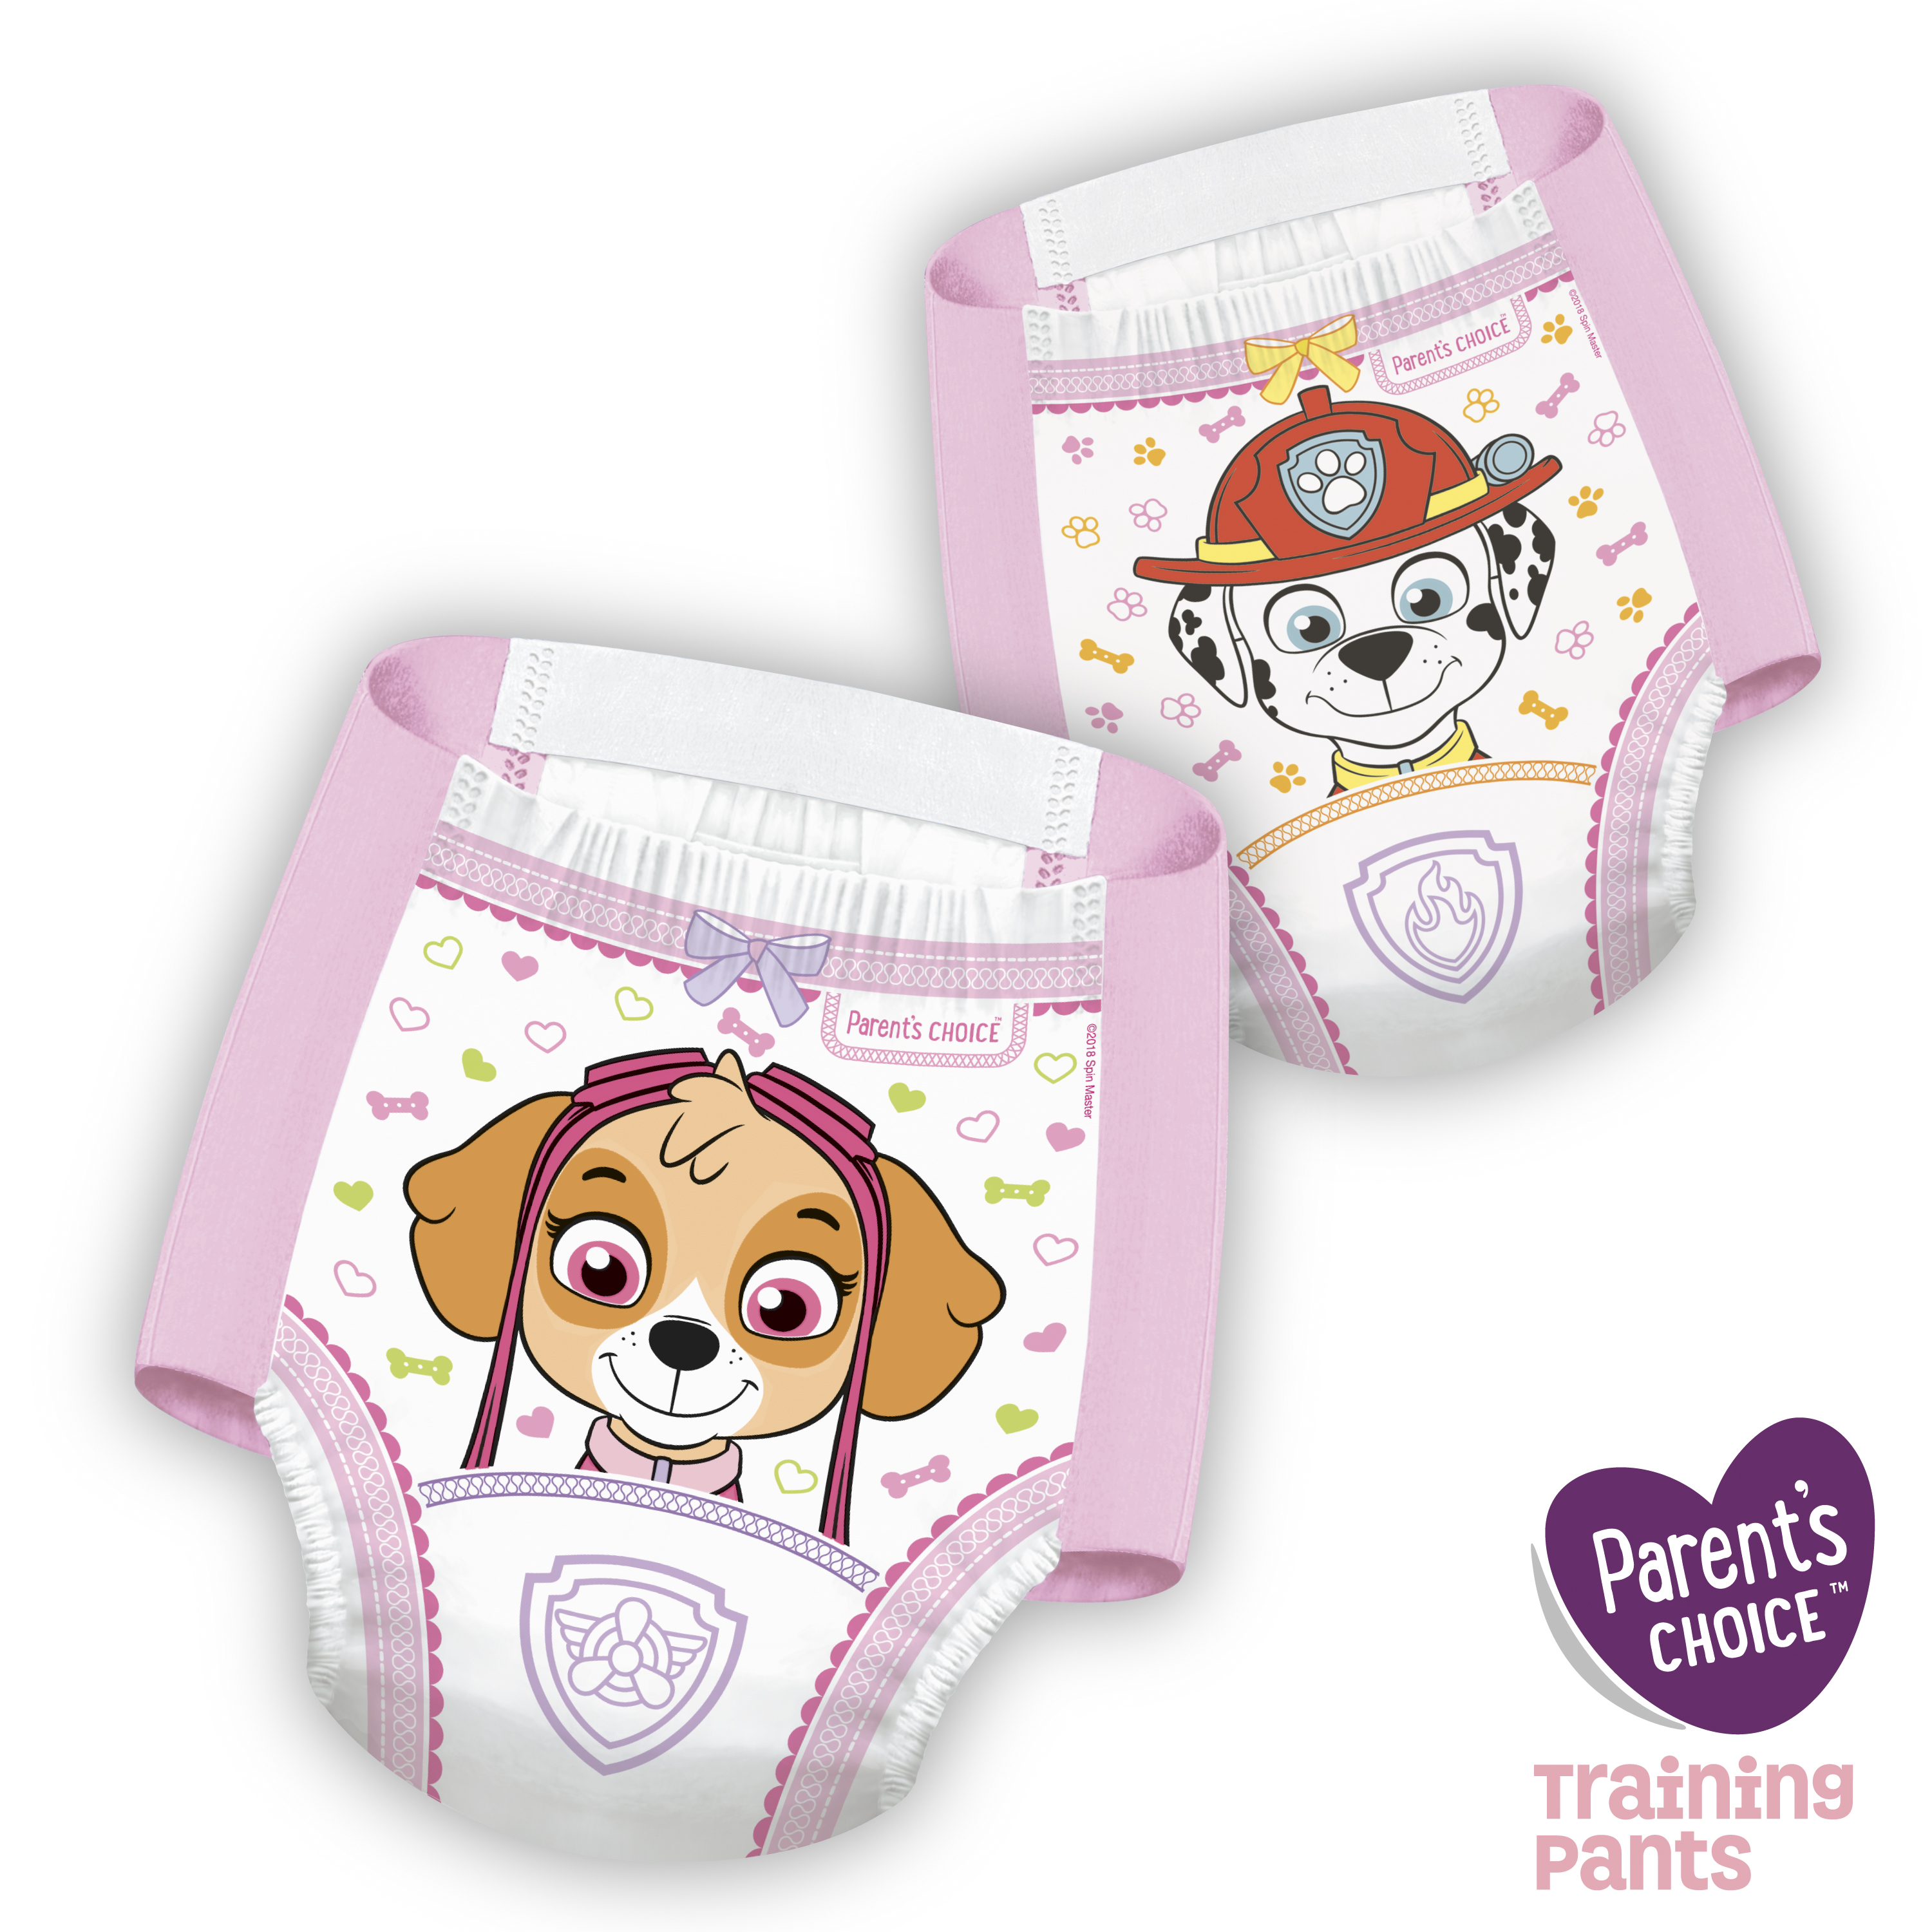 Parent's Choice Girls Training Pants, 4T - 5T, 70 Count - image 5 of 7